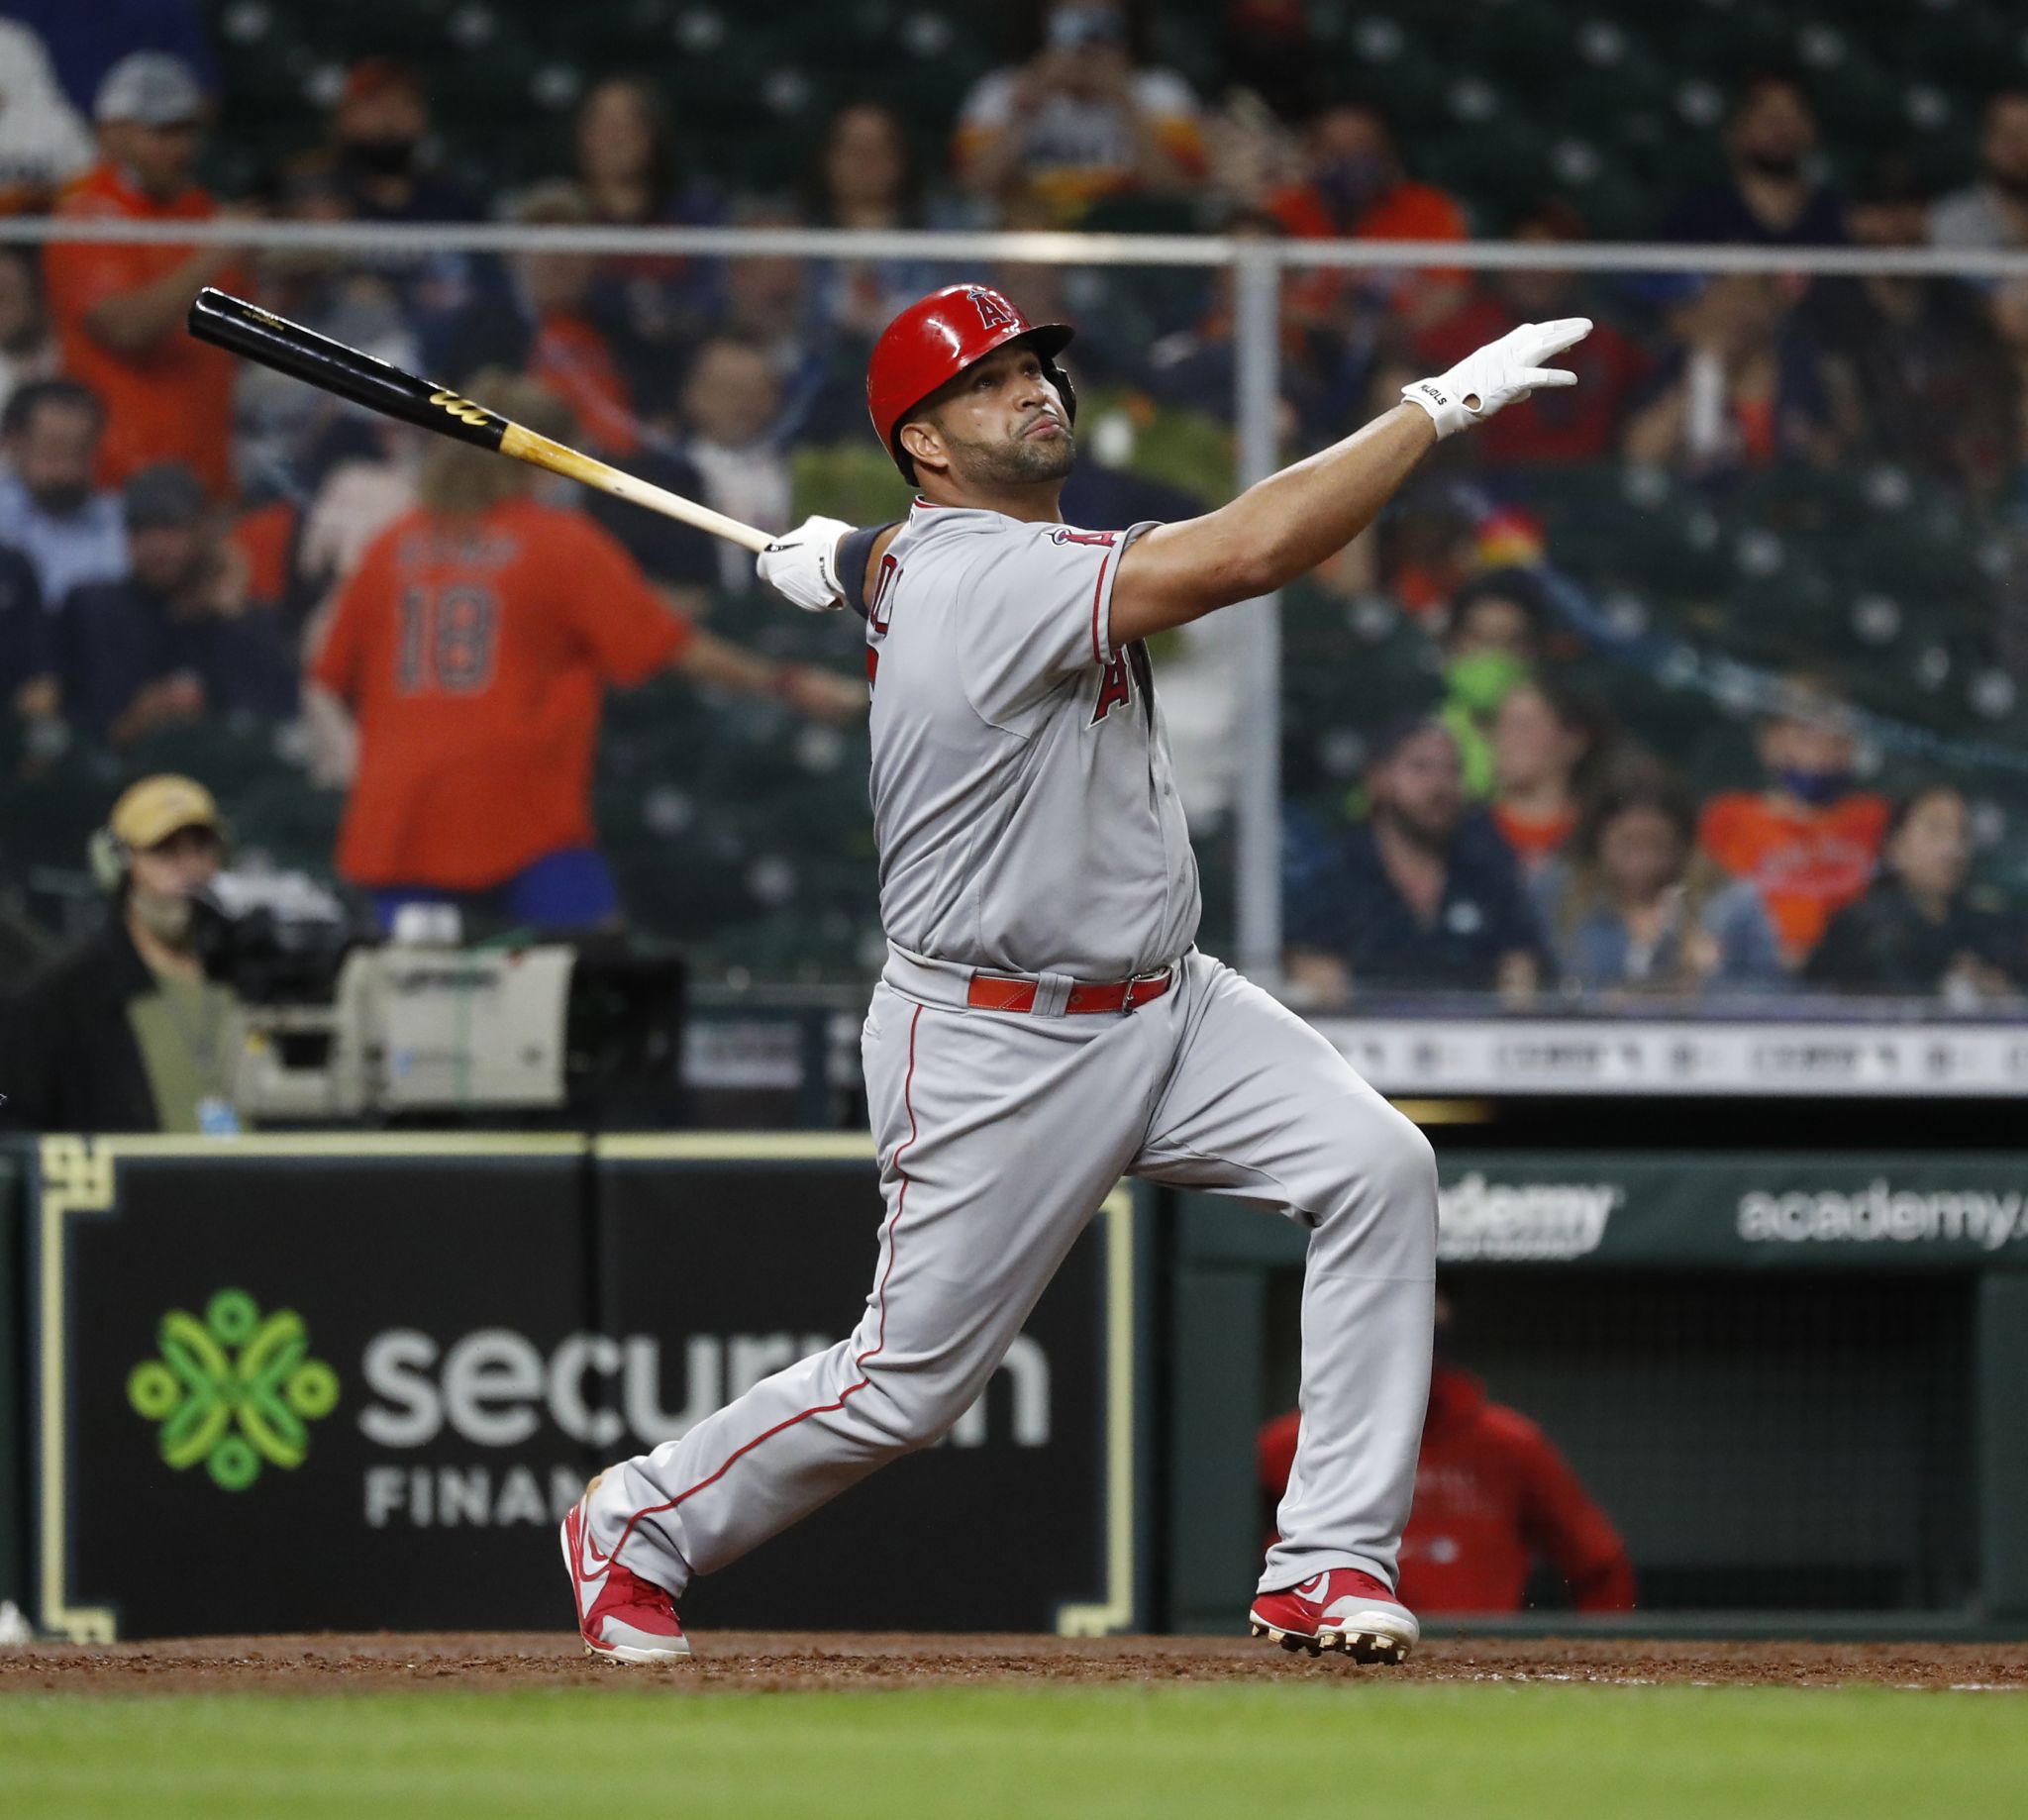 With Astros on hand, Albert Pujols returns to St. Louis Cardinals